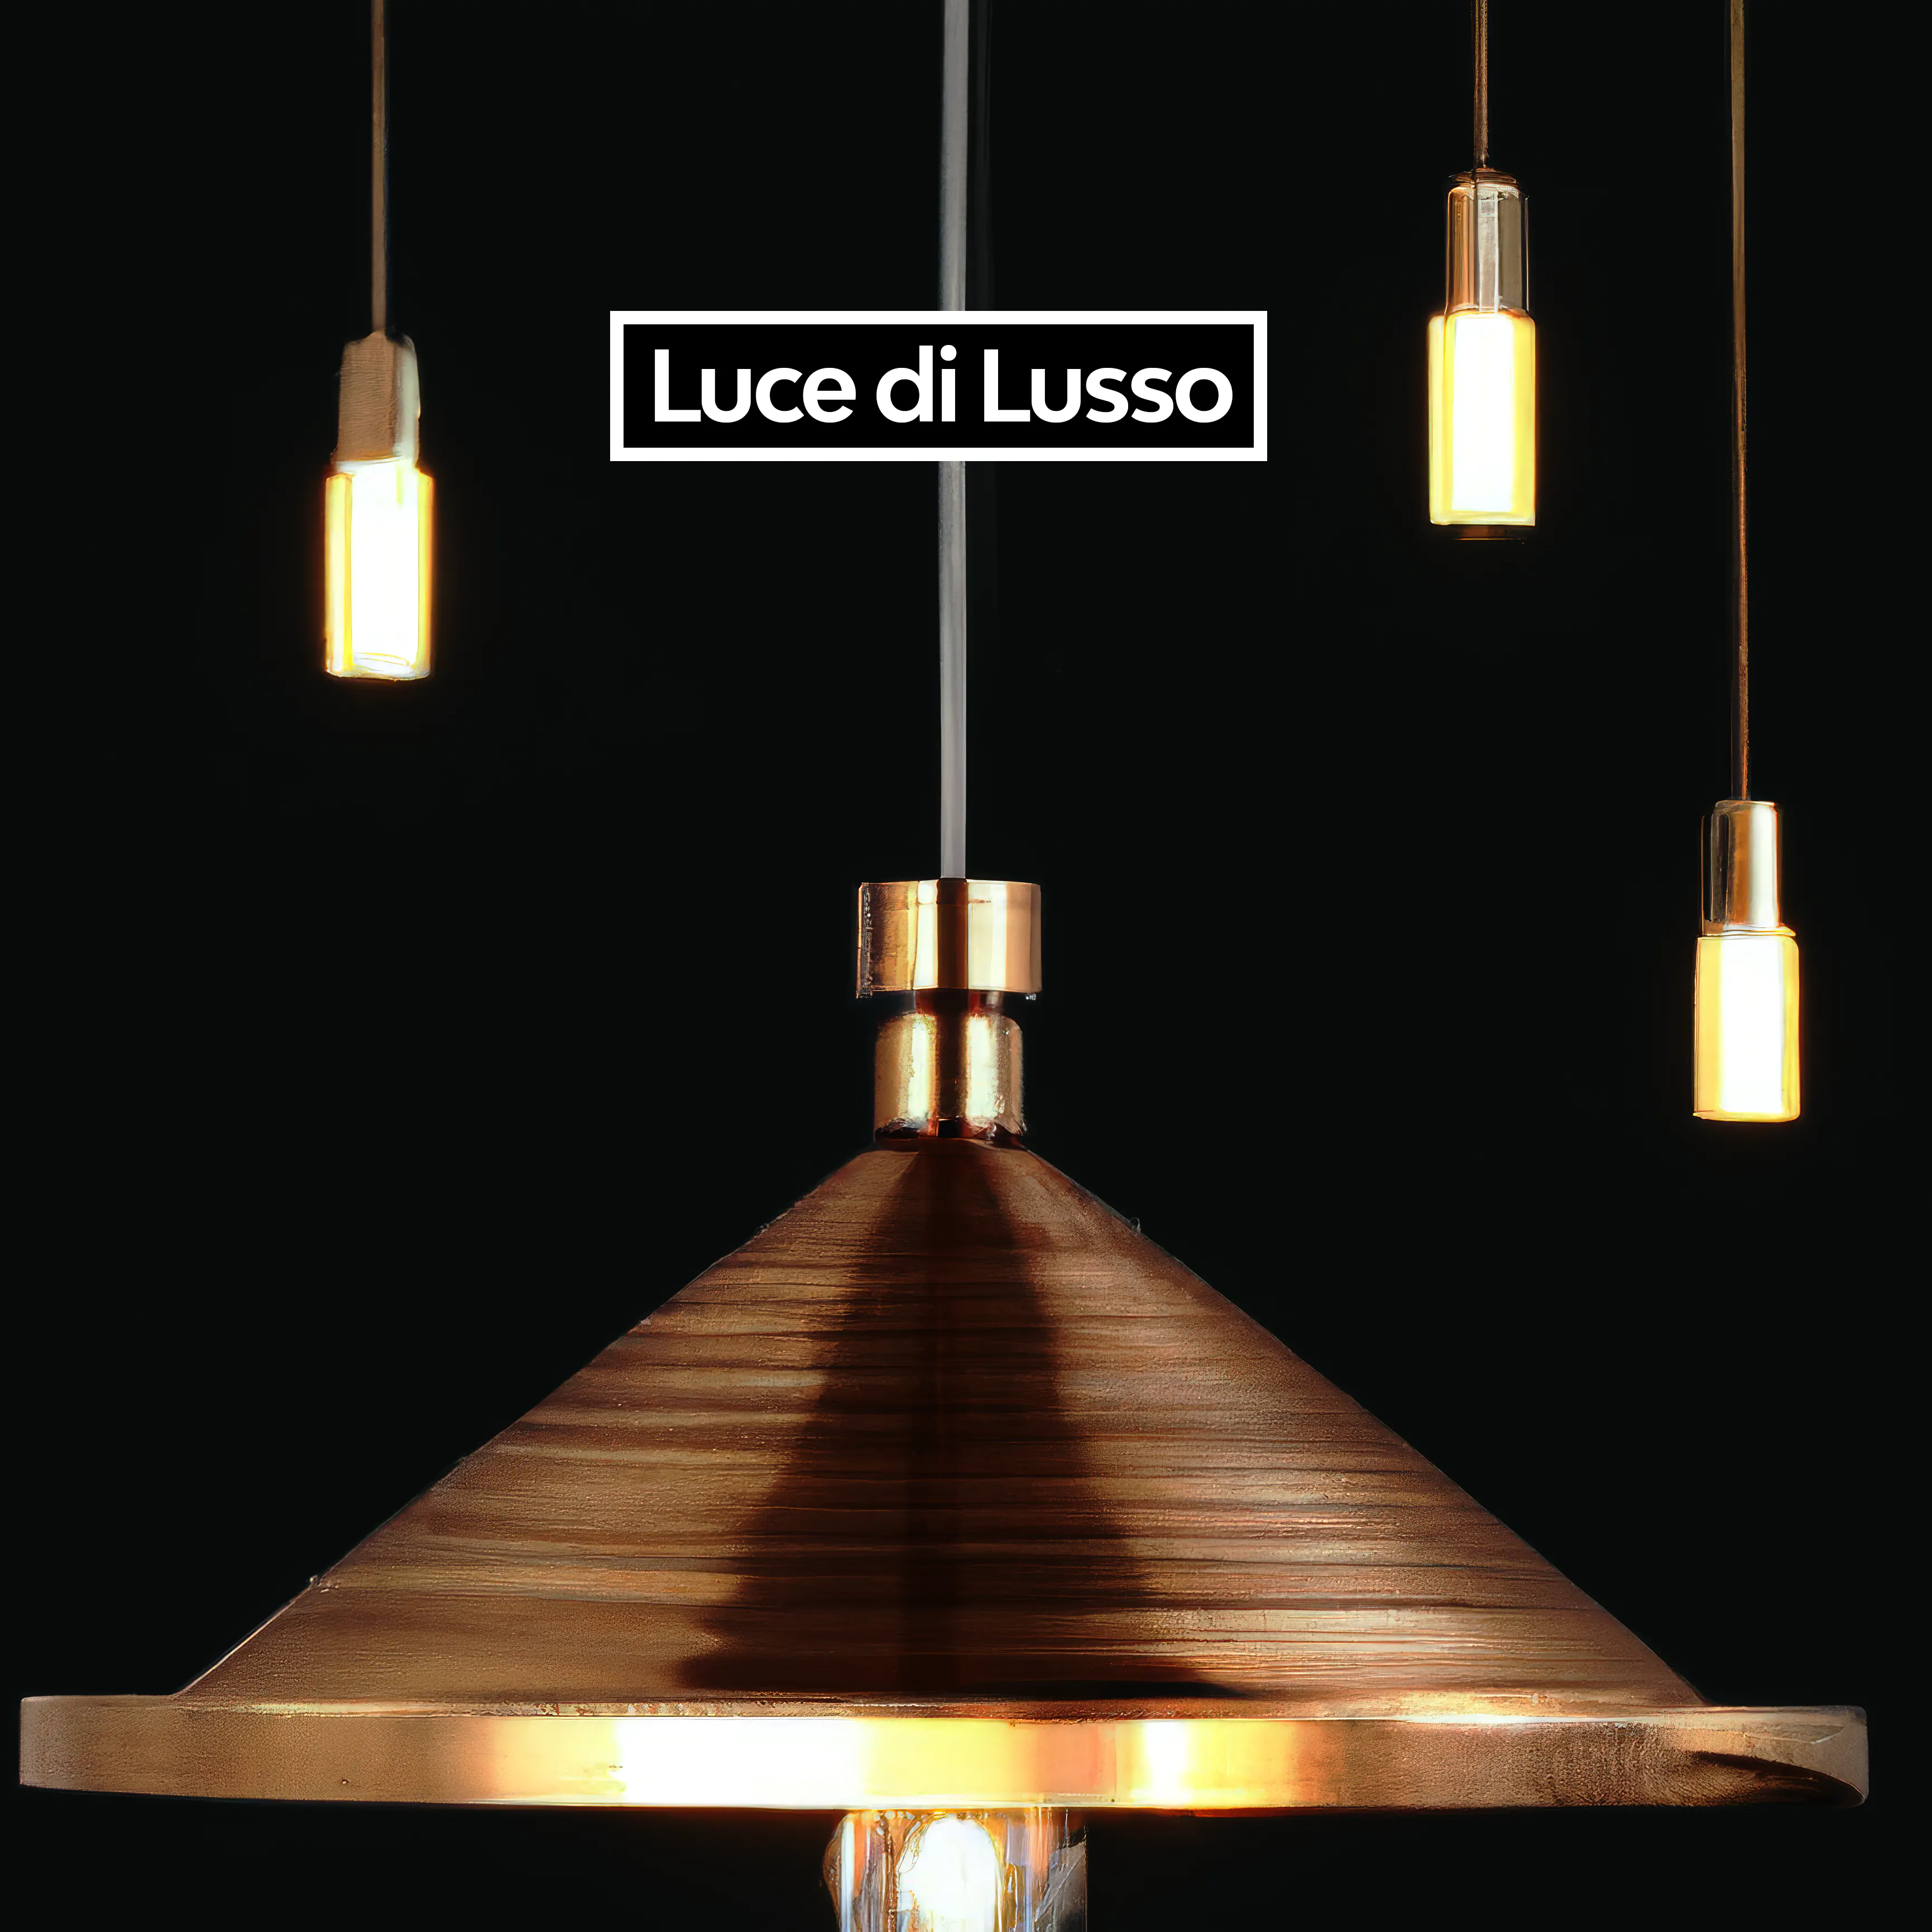 Luce di Lusso by Christopher Hysell